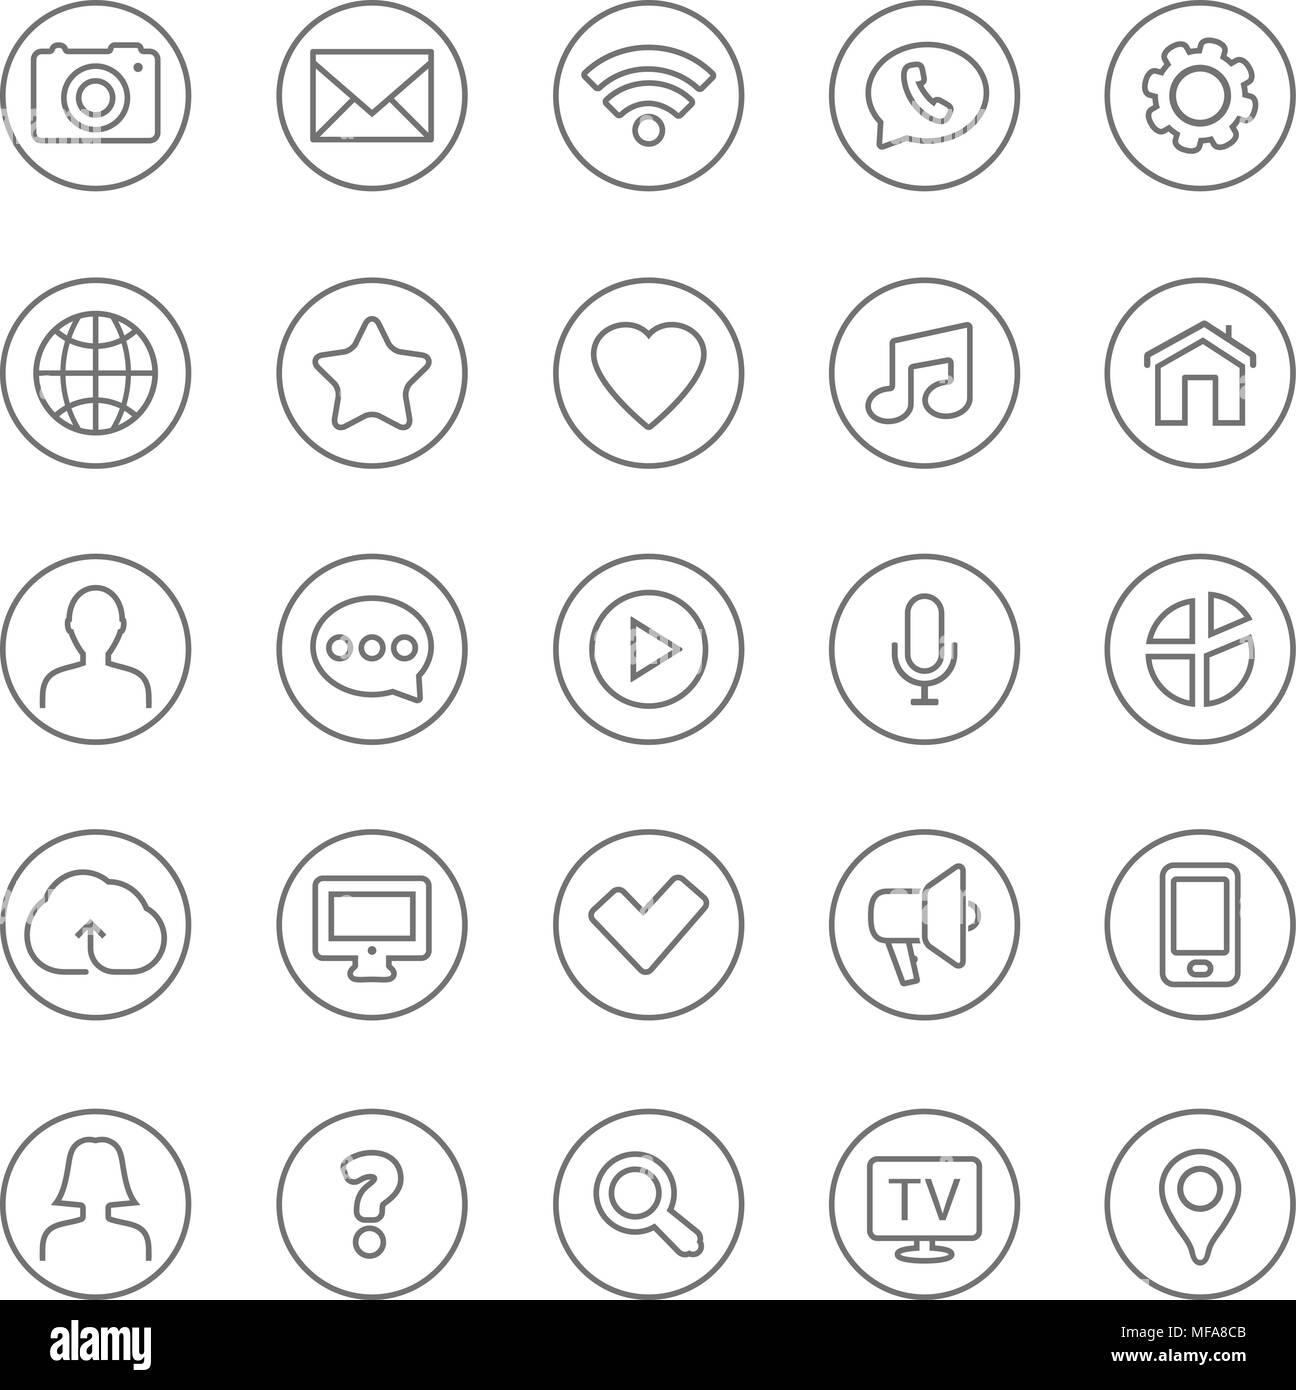 Thin lines web icons set - Contact and communication. Vector illustration. Stock Vector